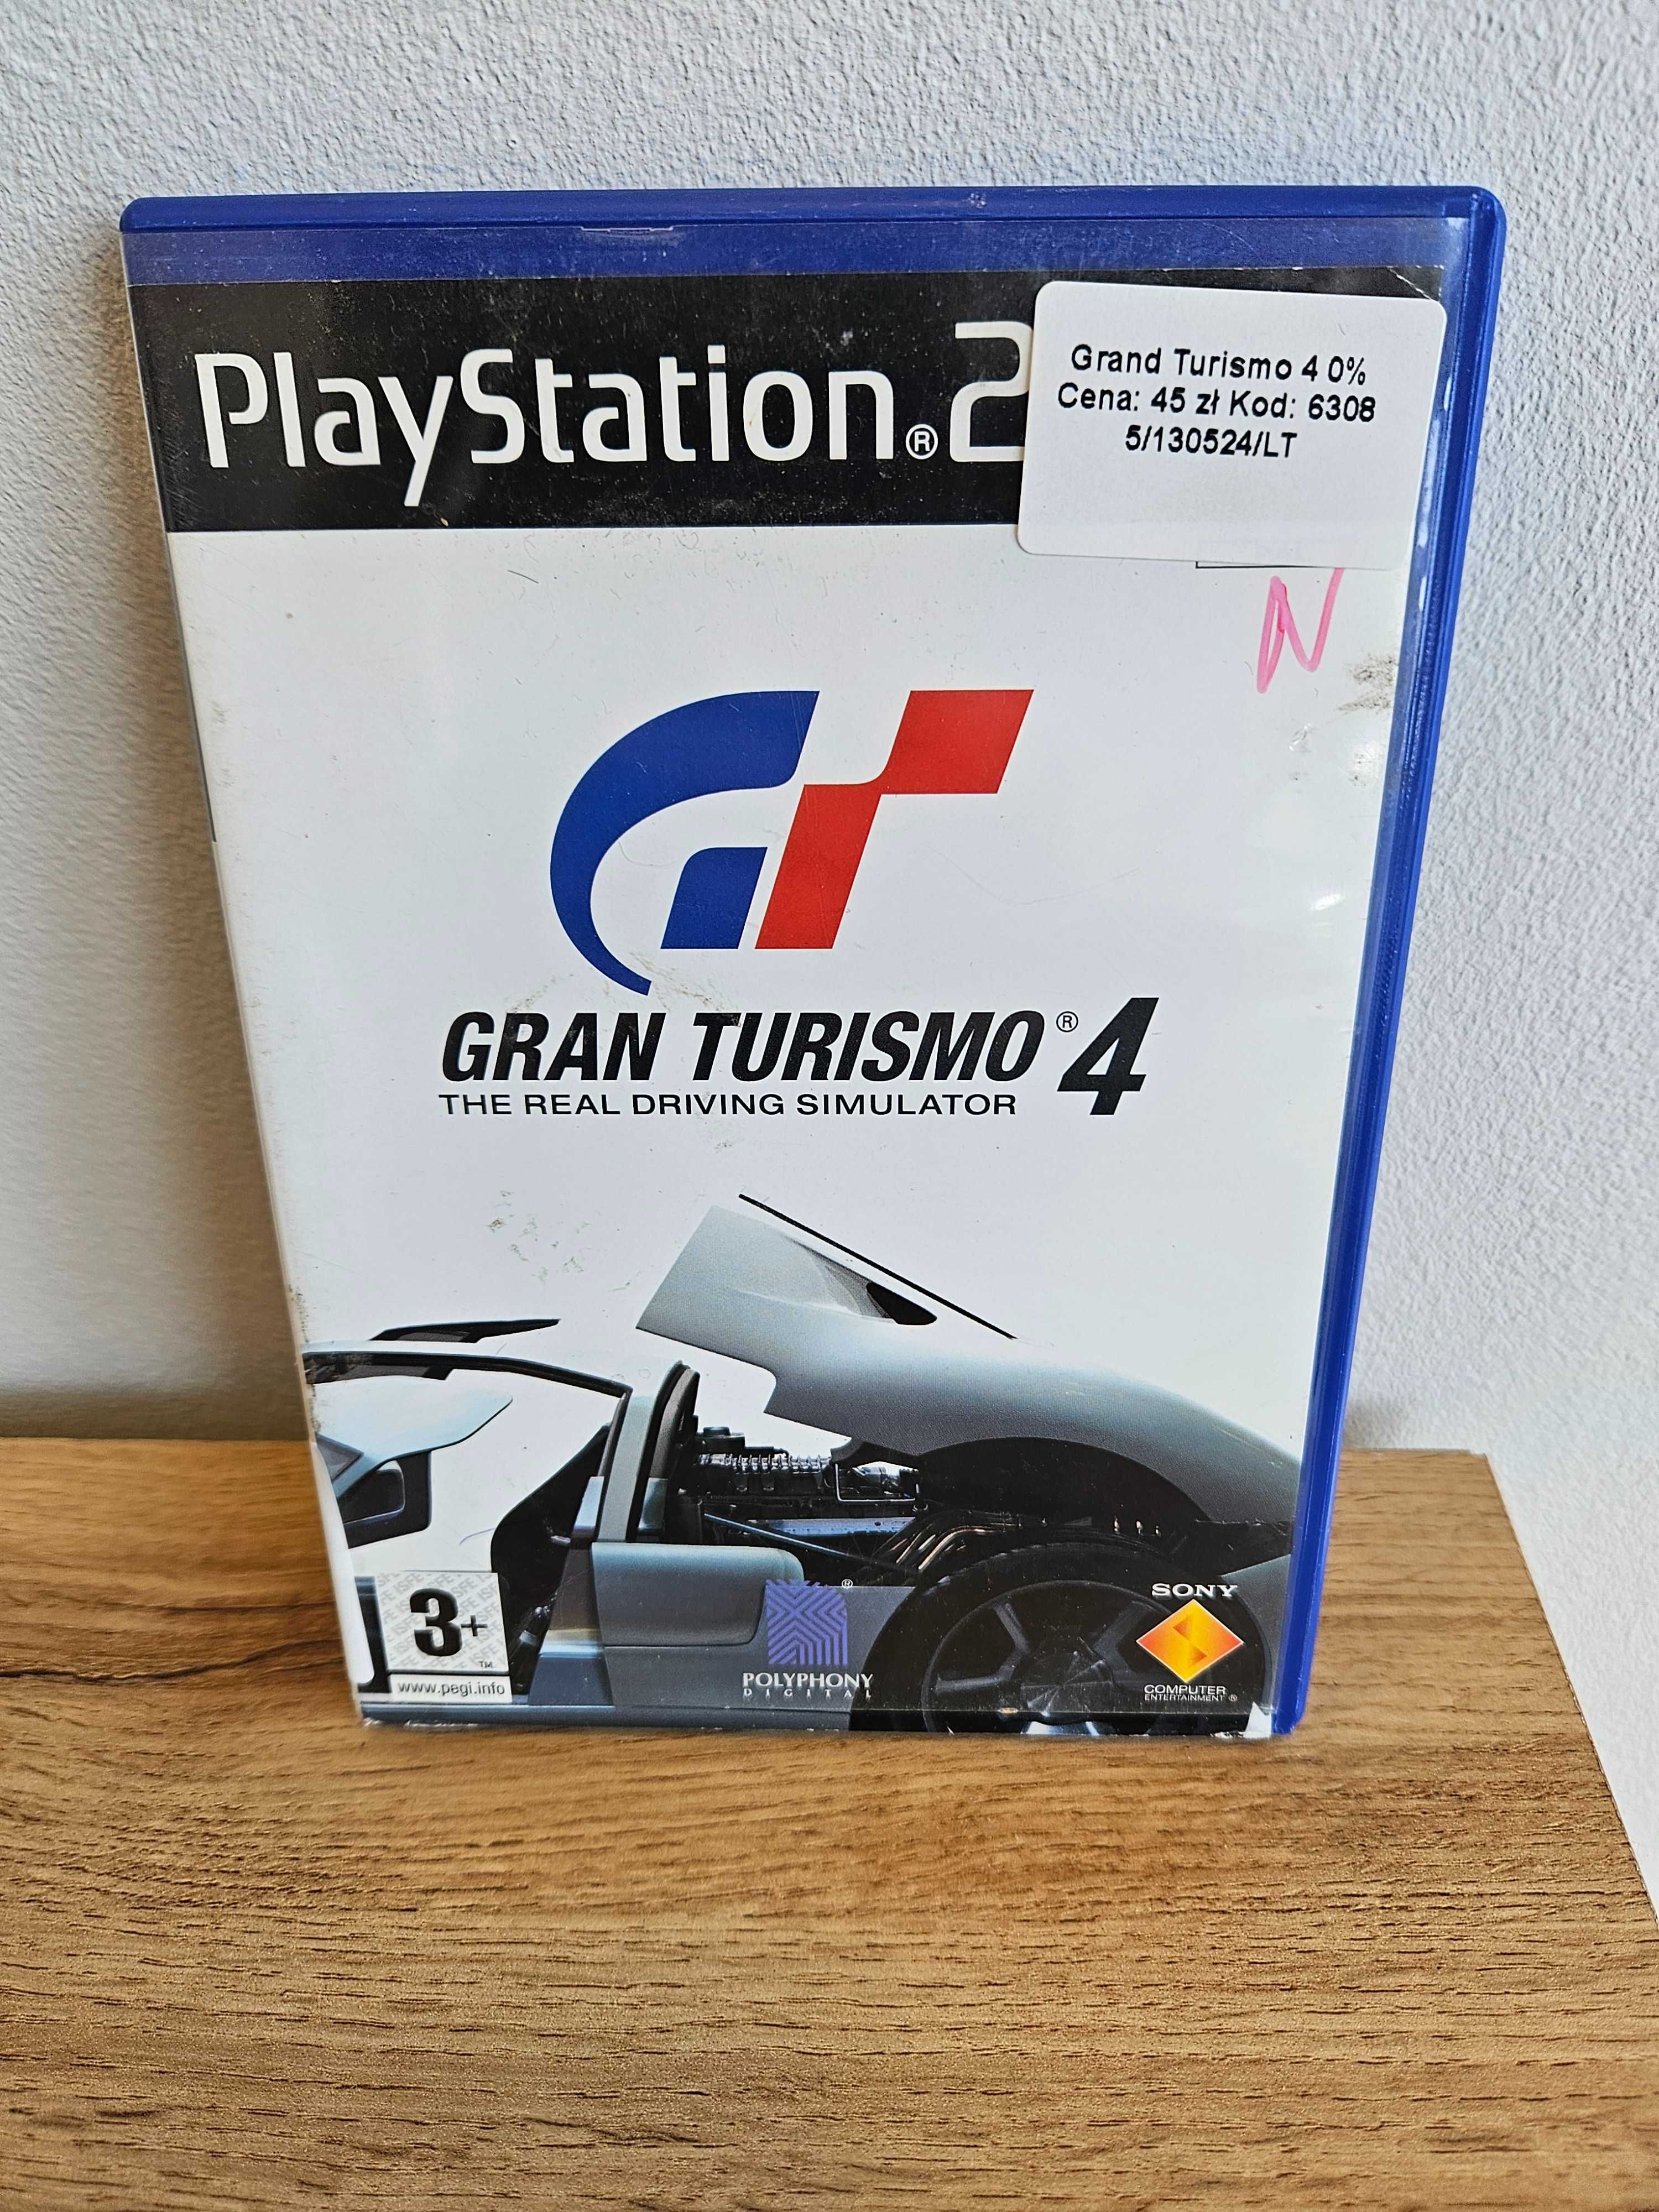 Grand Turismo 4 PlayStation 2 As Game & GSM 6308